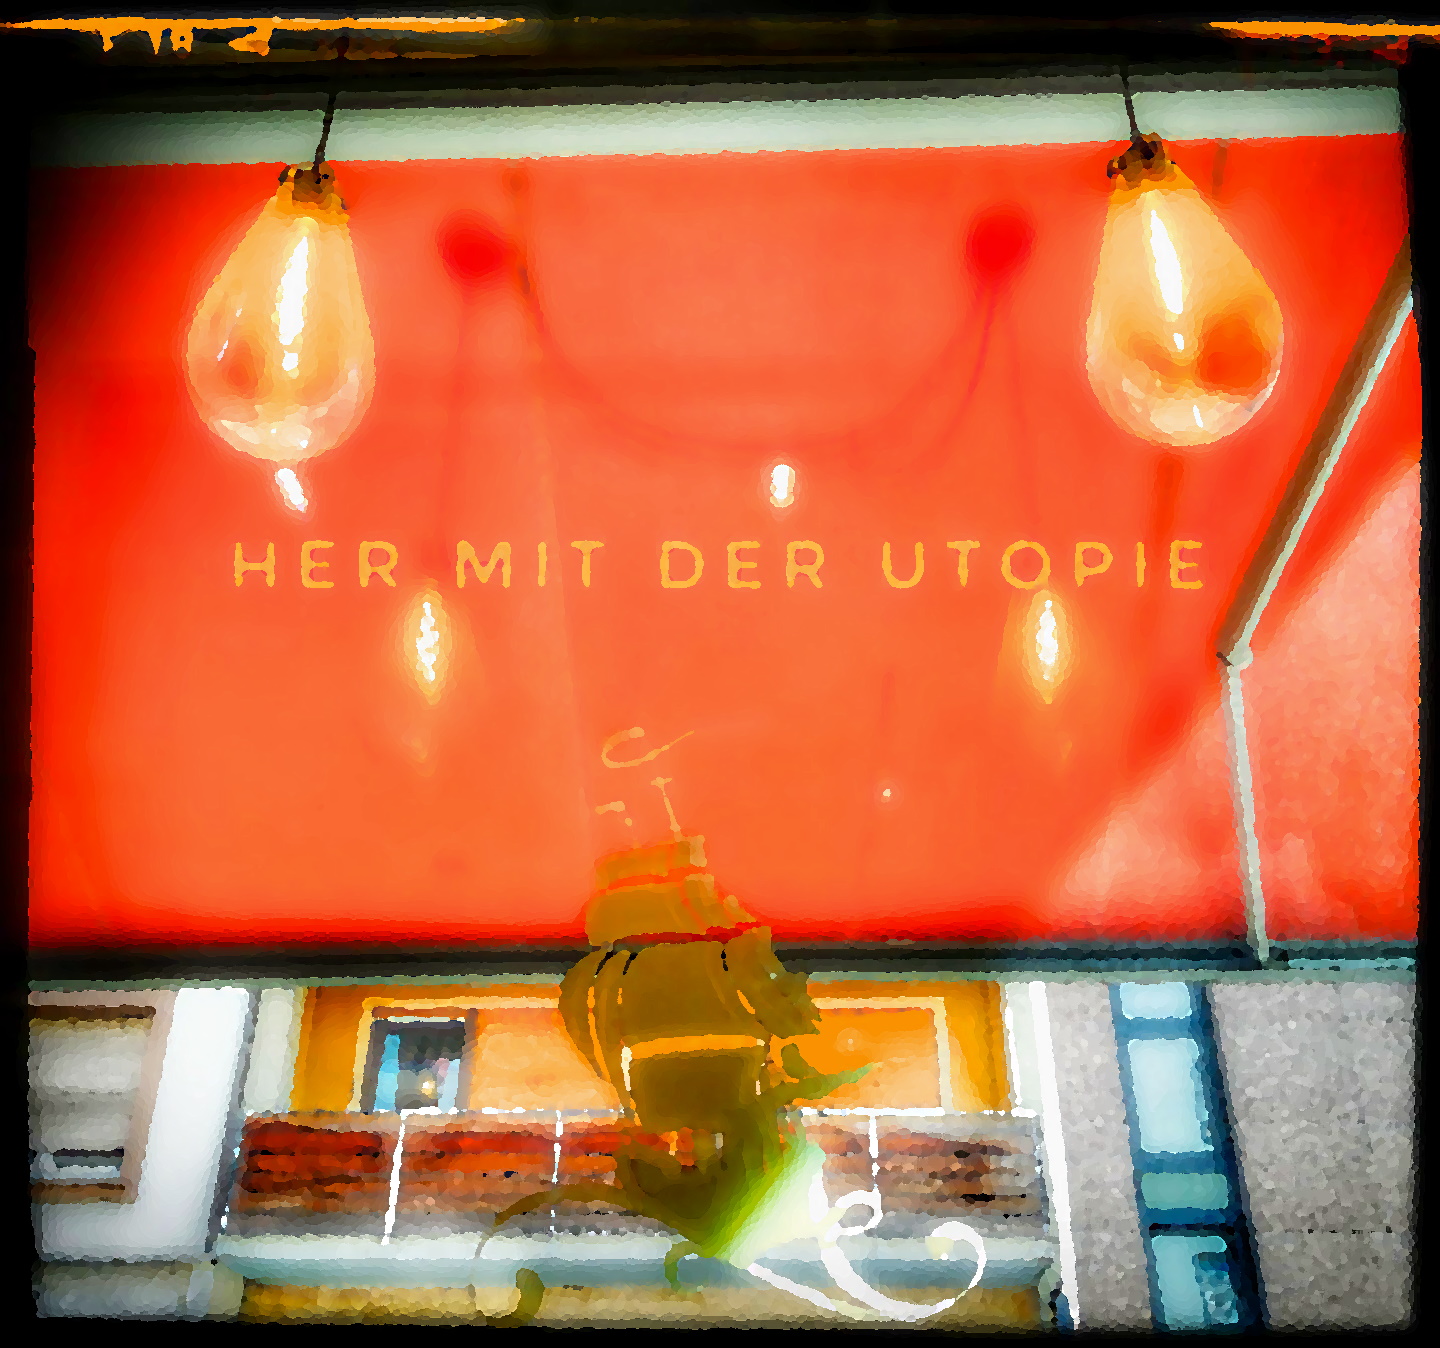 You are currently viewing HER MIT DER UTOPIE